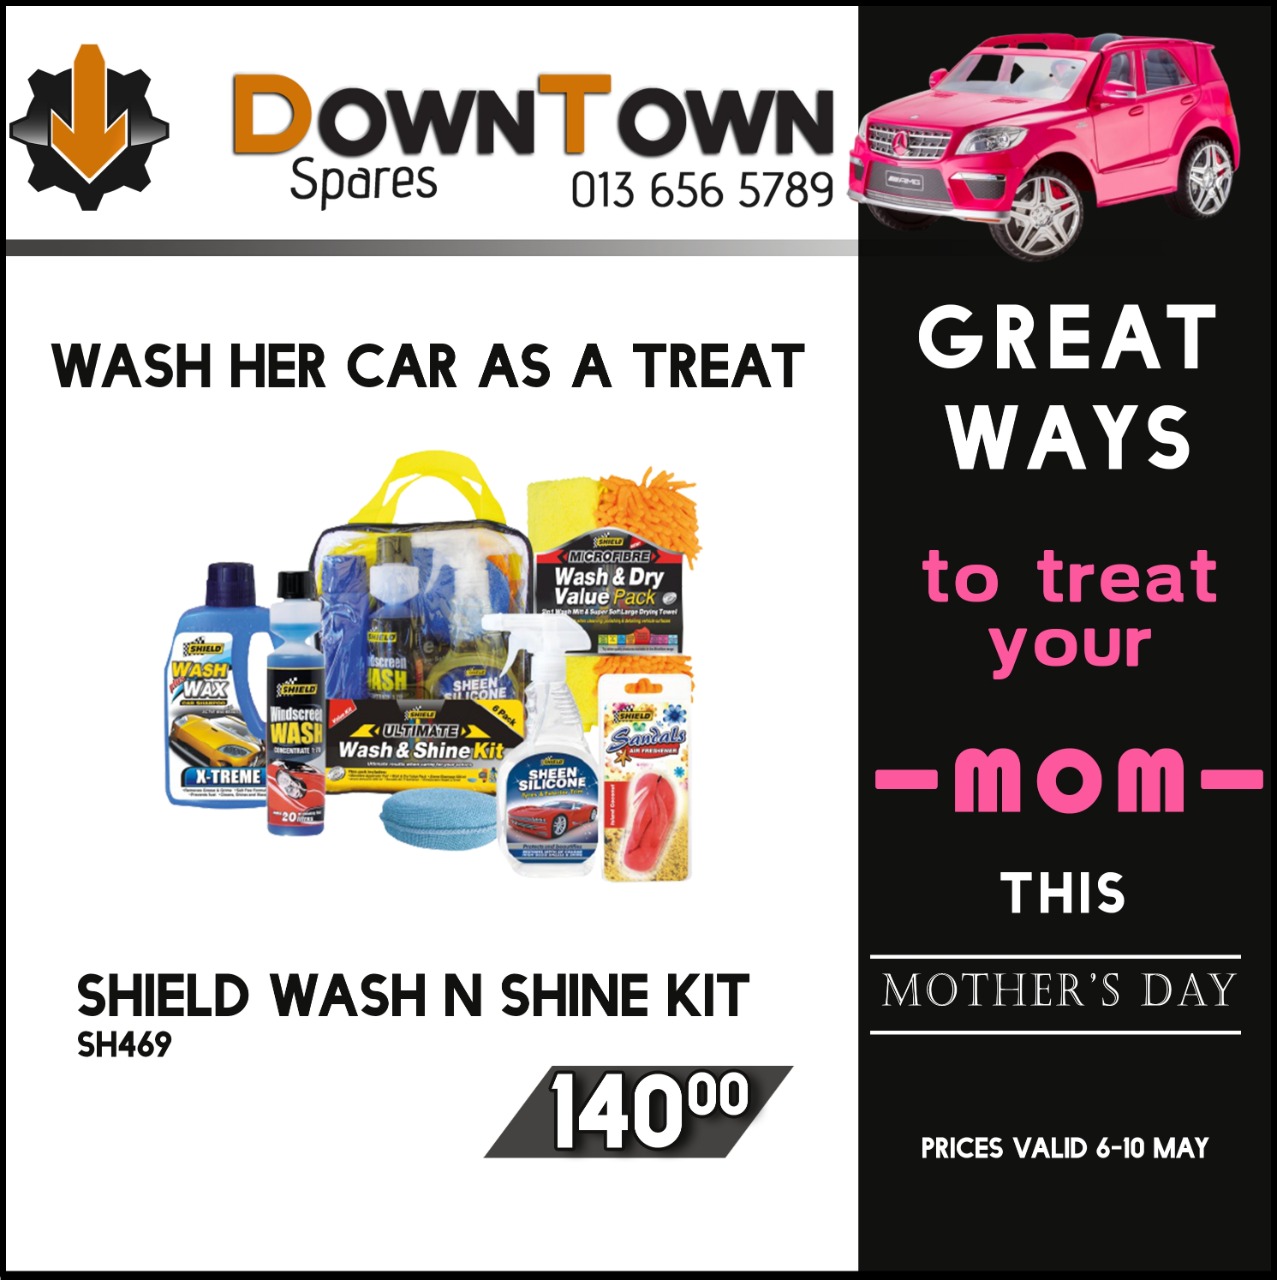 Great ways to Treat your Mom this Mother's Day at Downtown Spares!